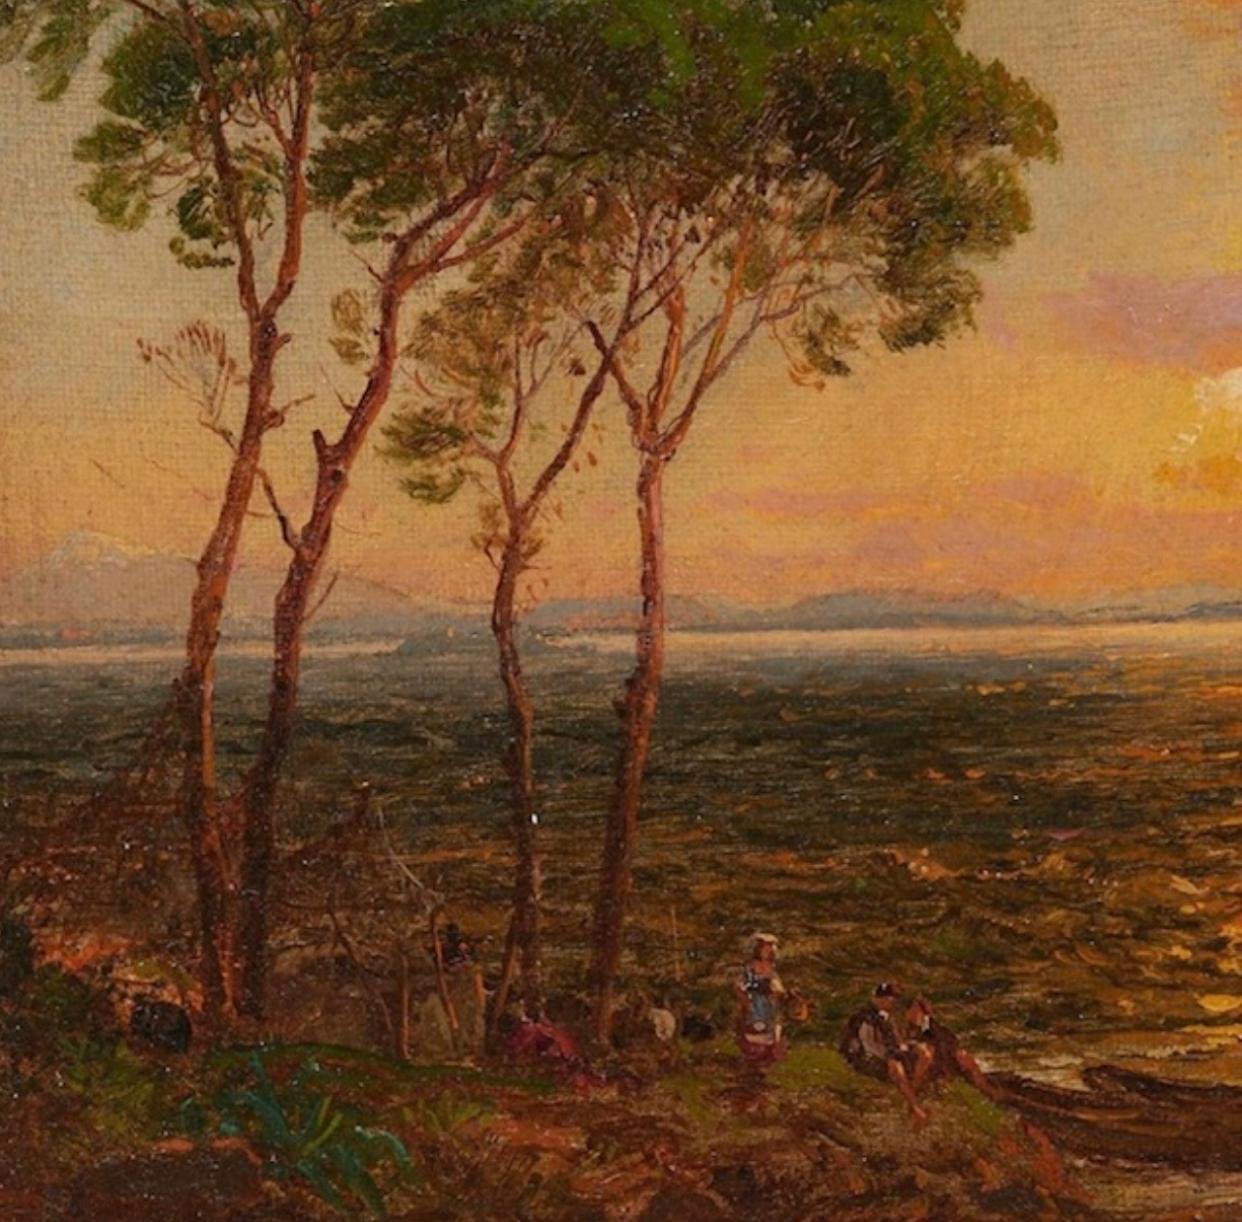 “Sunset over Lake Thrasemine” - Painting by Jasper Francis Cropsey